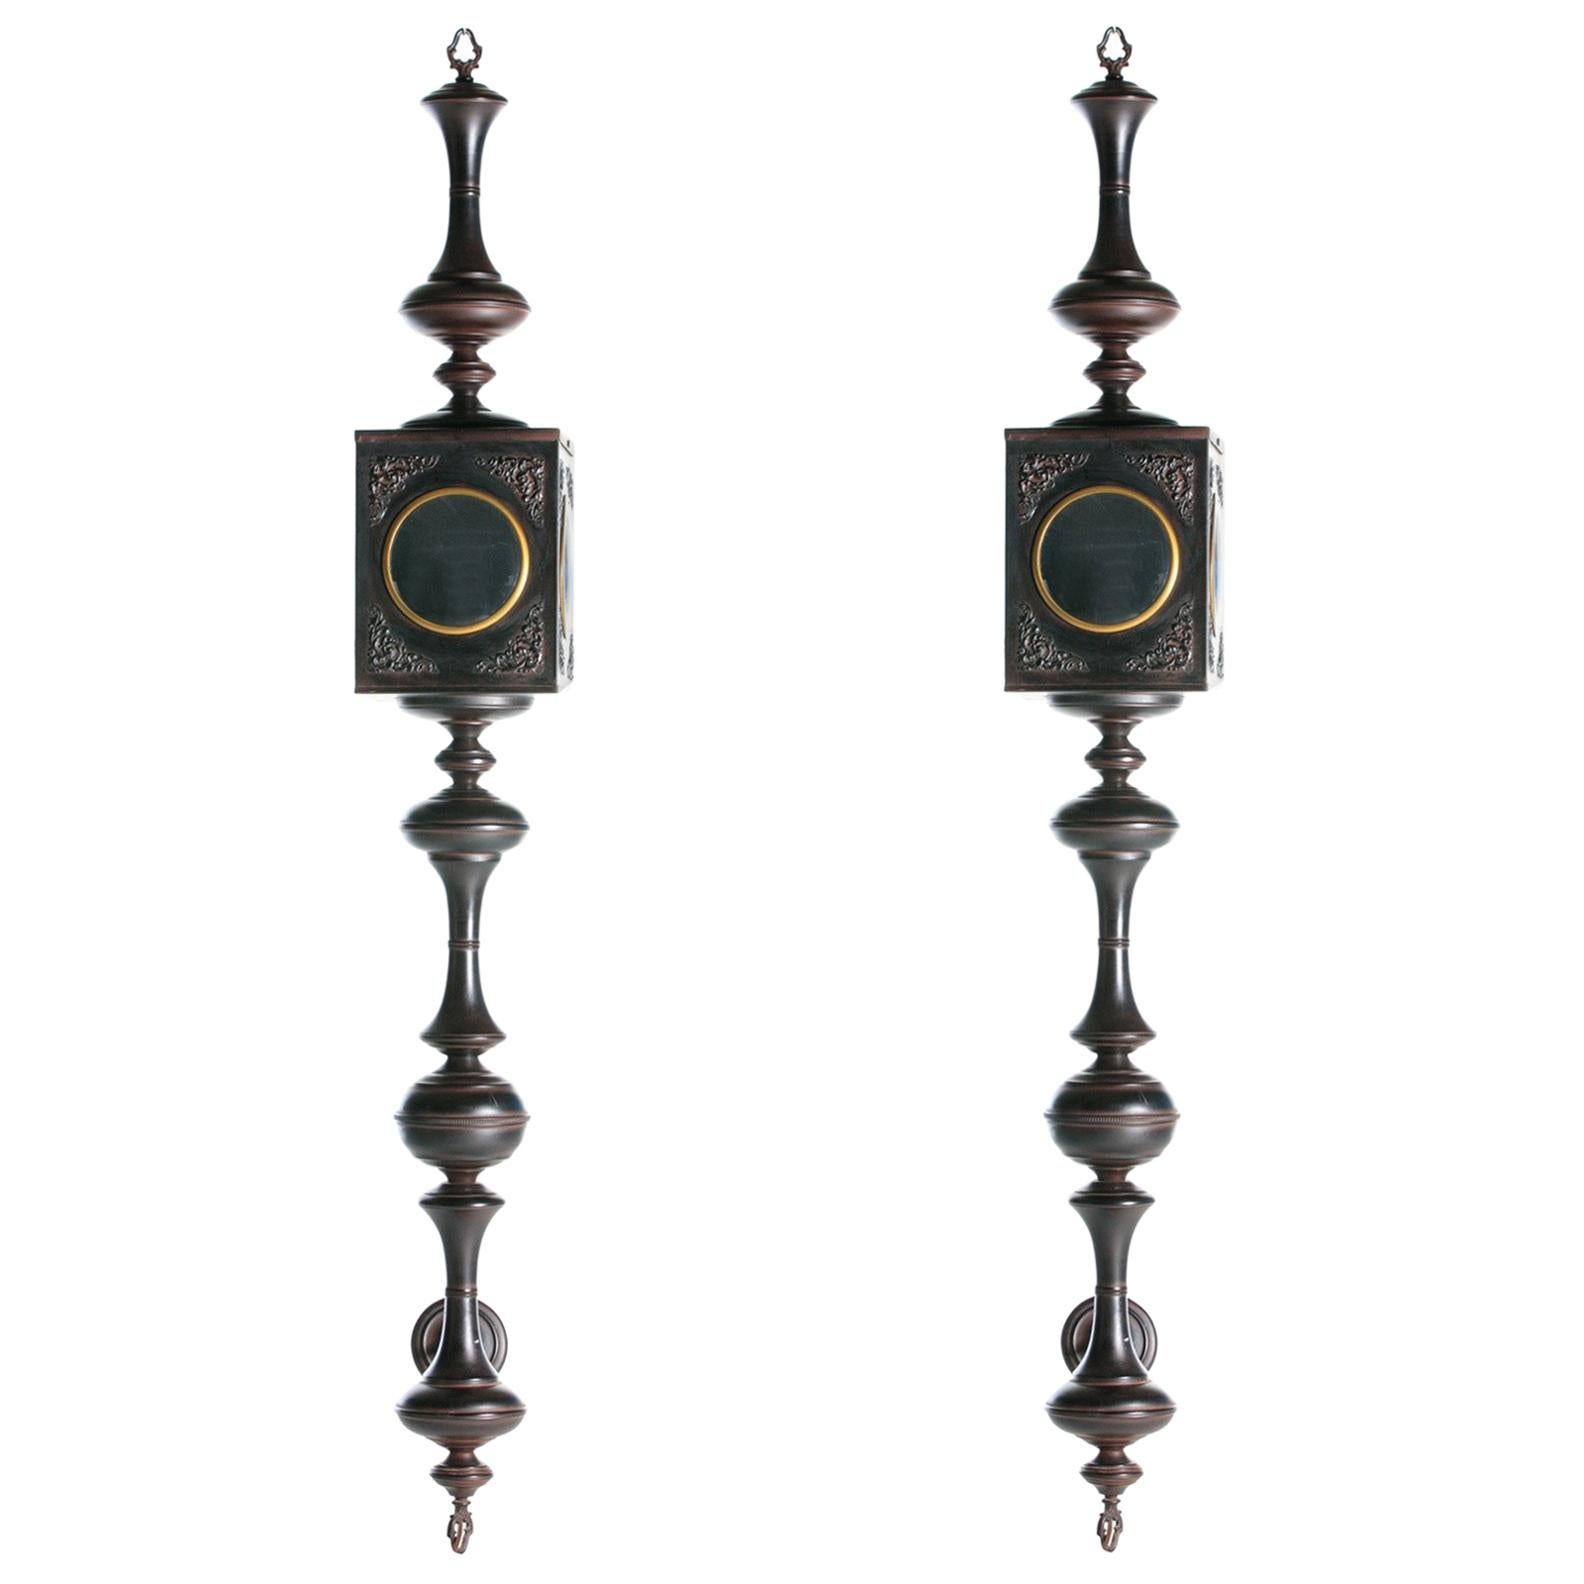 Vintage Pair of Dramatic Hollywood Regency Outdoor Sconces